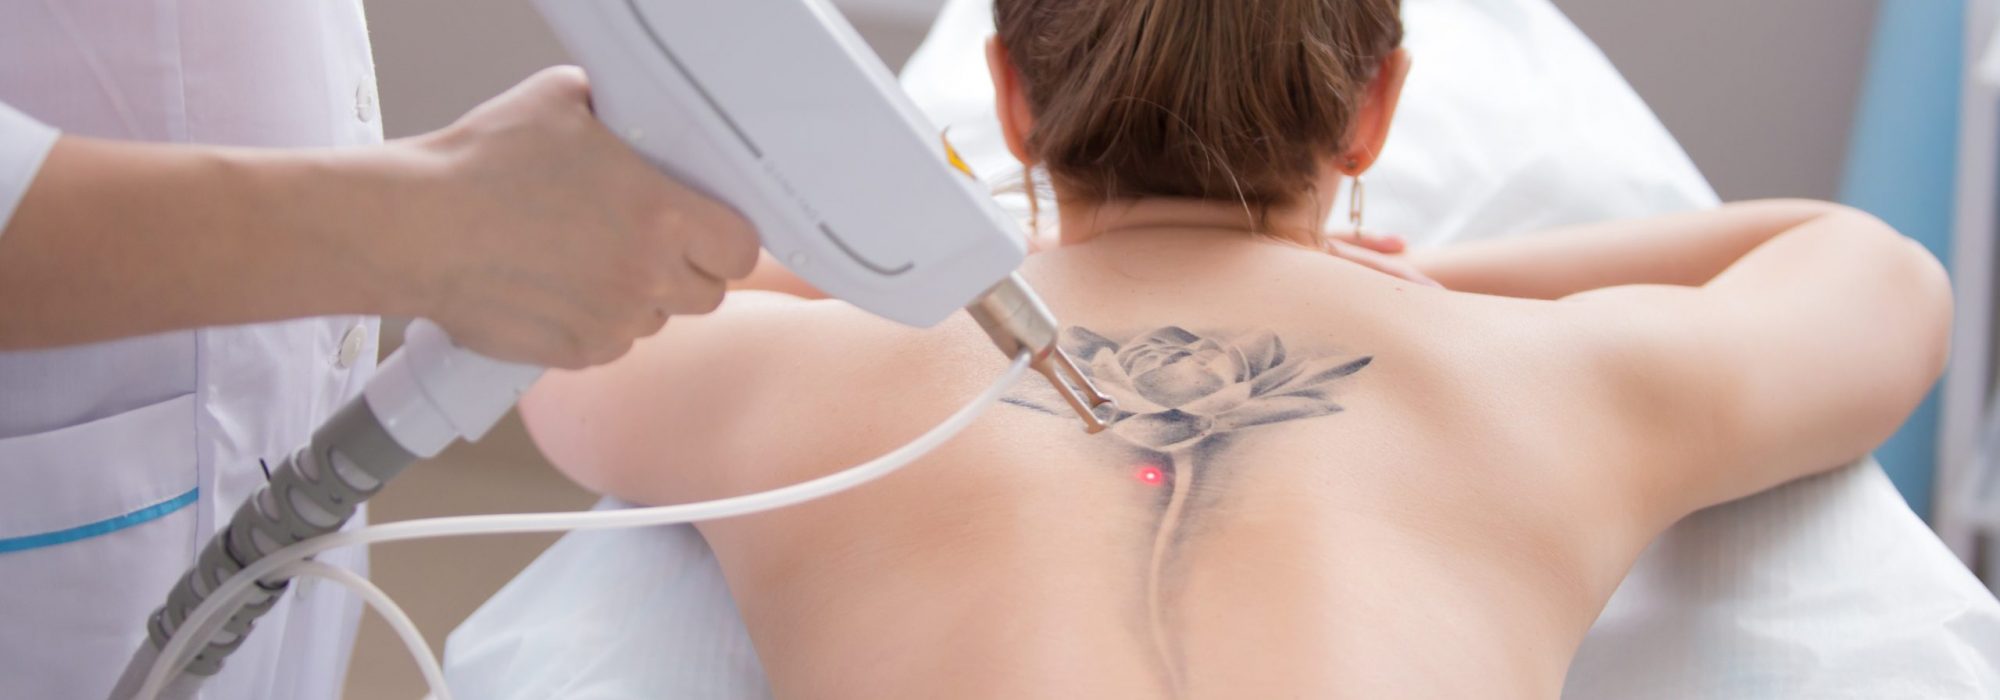 laser tattoo removal from back